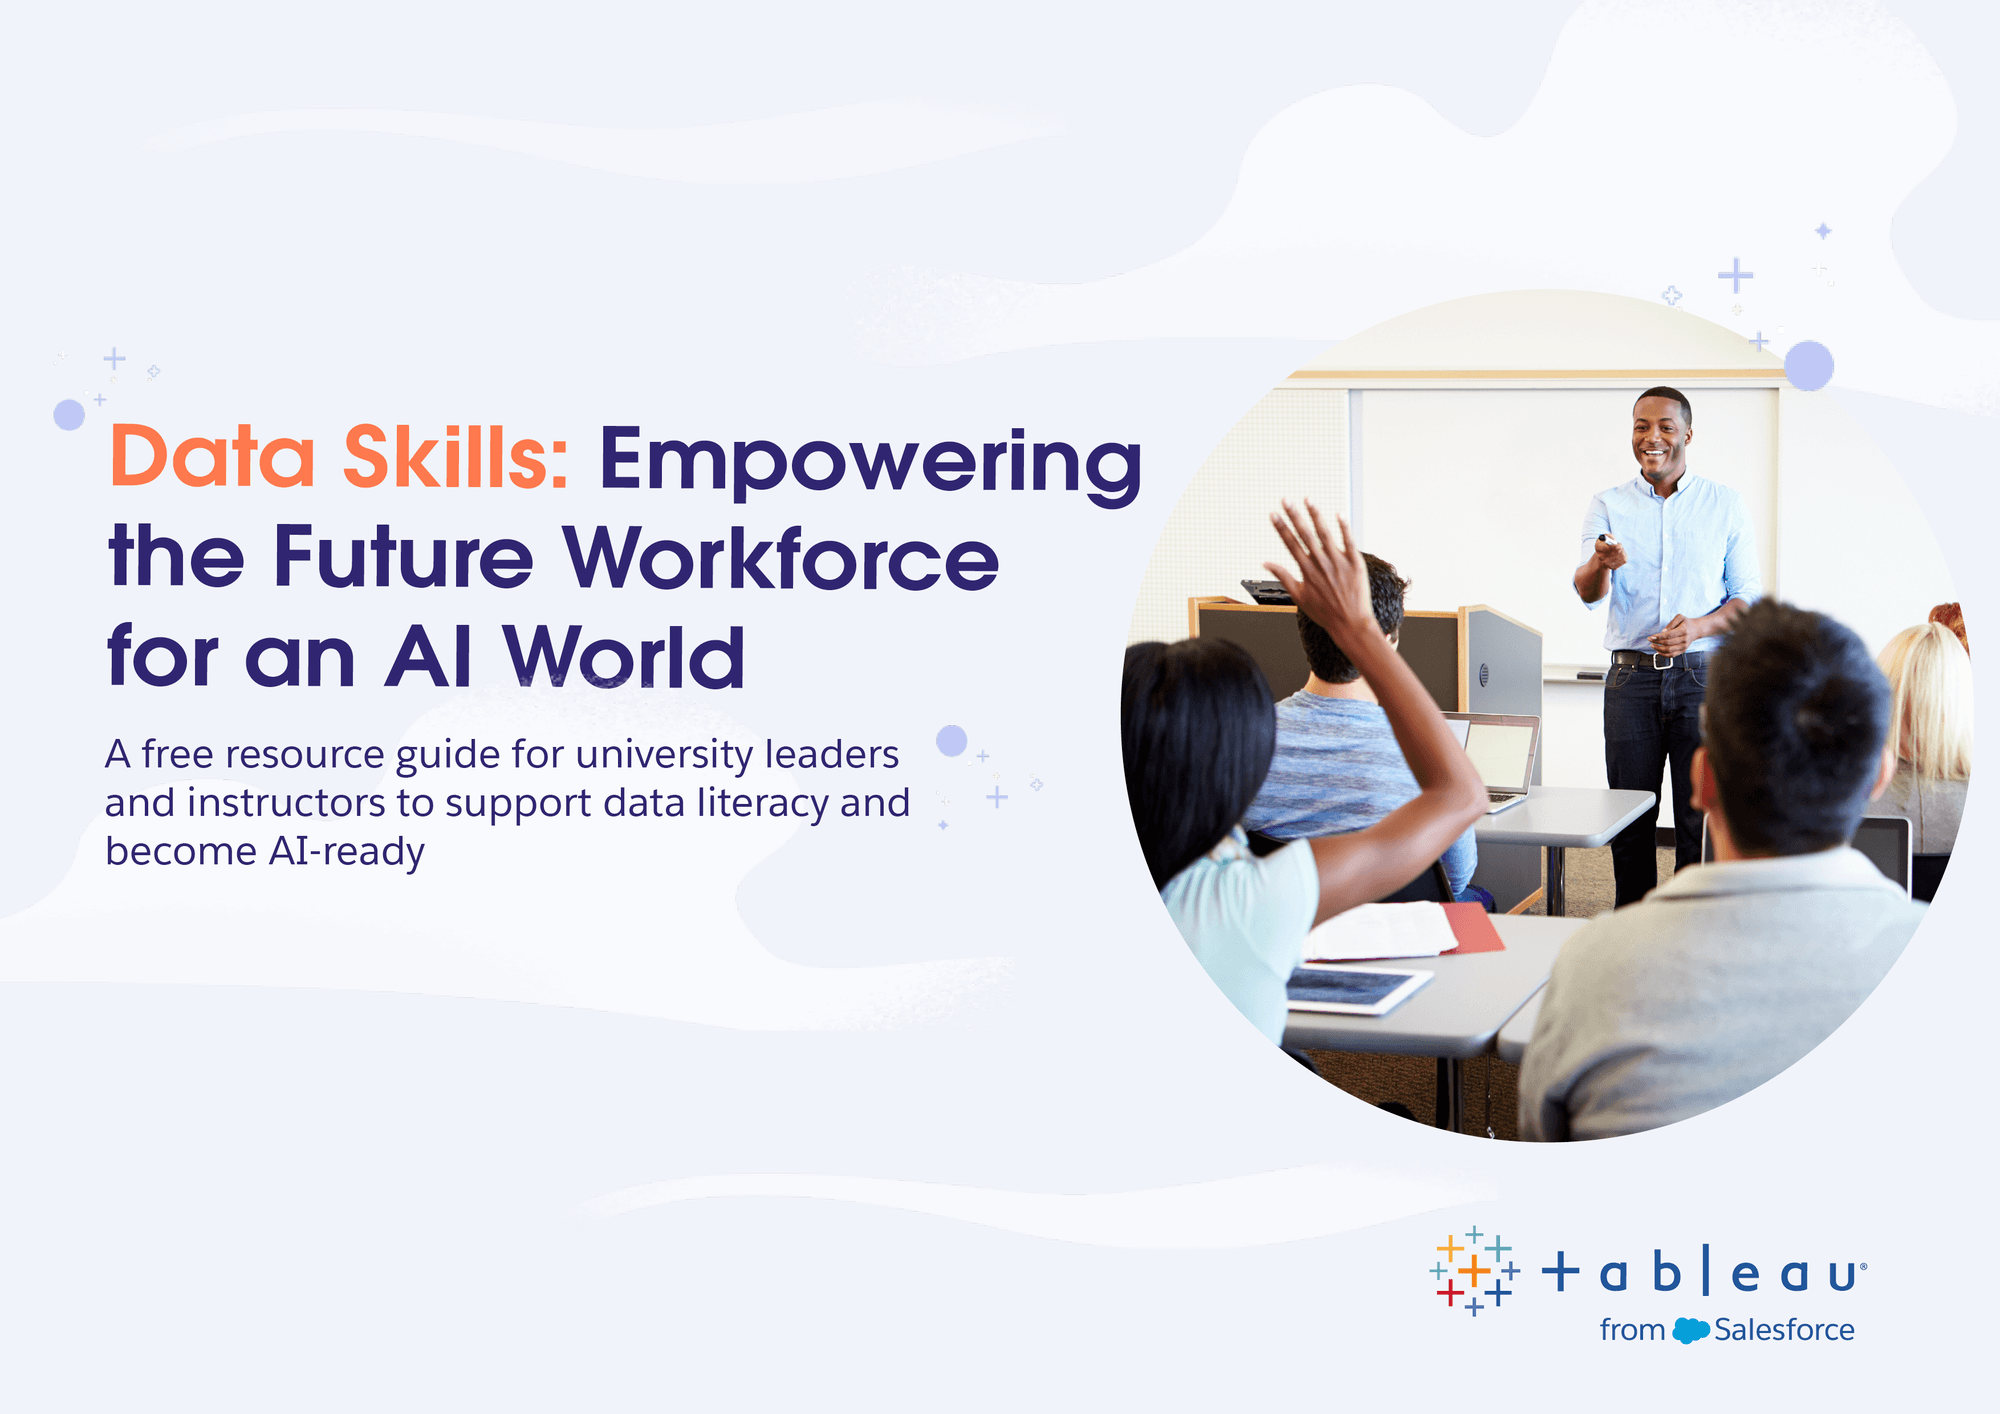 Data Skills: Empowering the future workforce for an AI world. A free resource guide for university leaders and instructors to support data literacy and become AI-ready